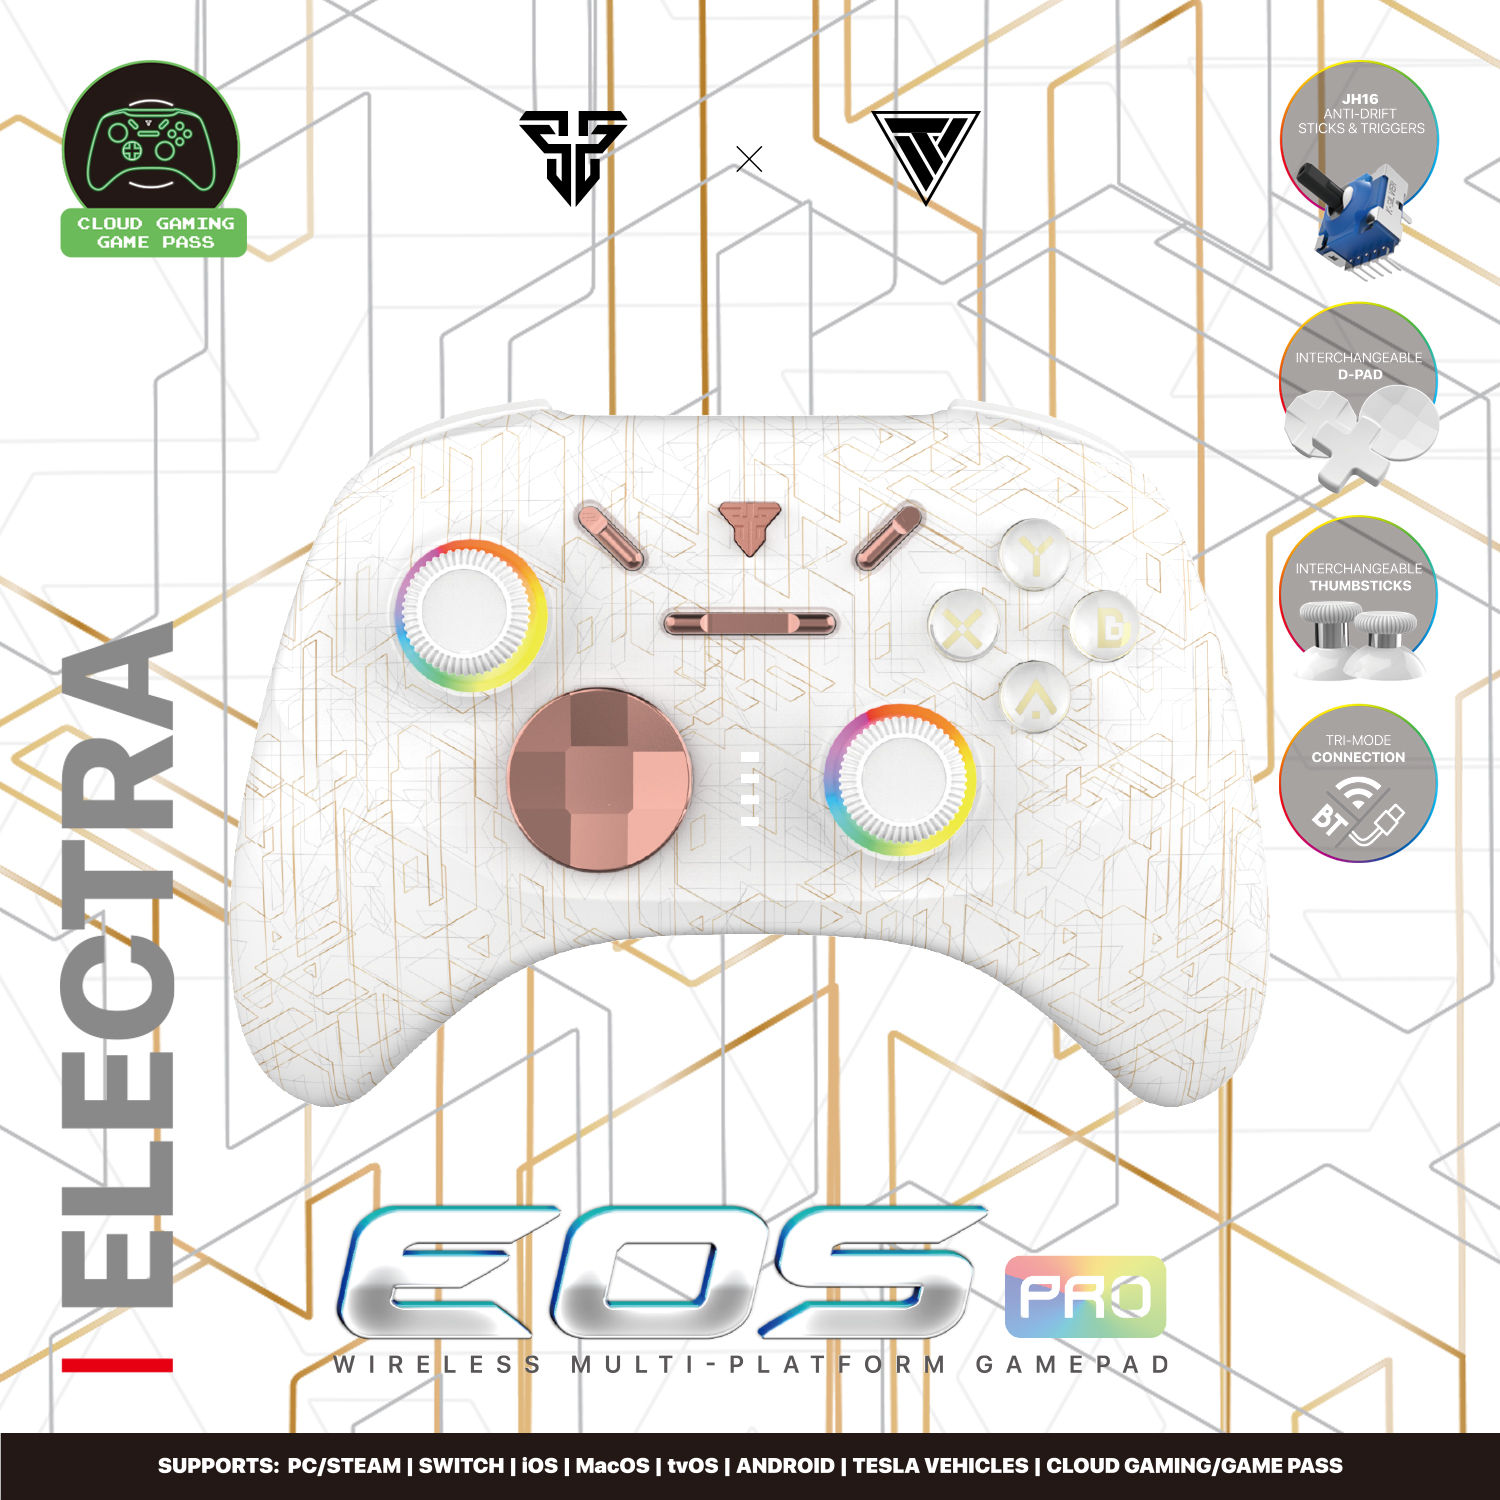 A large marketing image providing additional information about the product Fantech EOS Pro Gamepad Wireless Multi-Platform Hall-Effect Game Controller - White - Additional alt info not provided